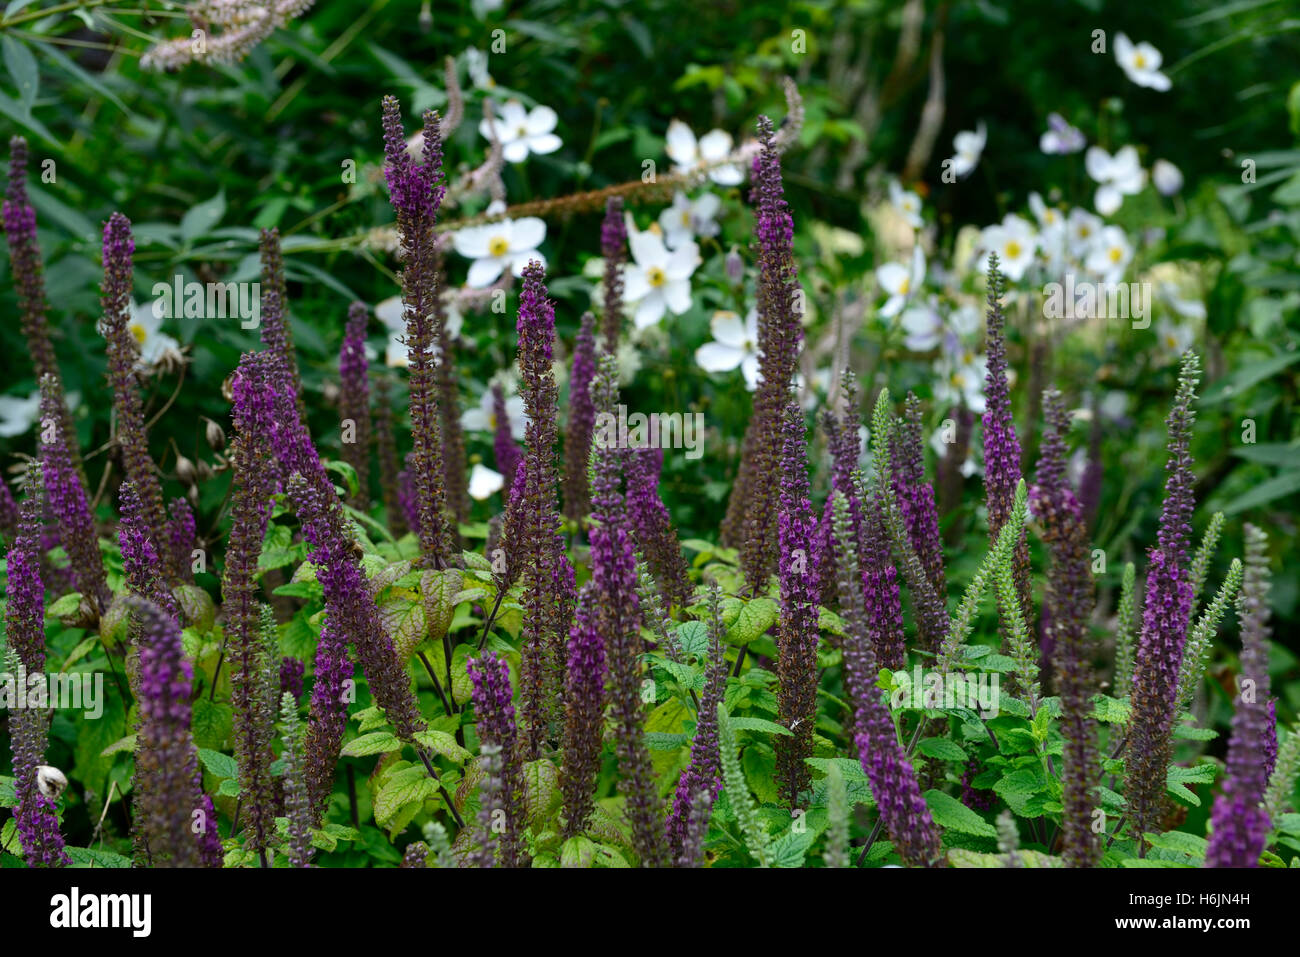 teucrium hircanicum purple tails Germander Wood Sage spires perennials fragrant scented spikes tall RM Floral Stock Photo